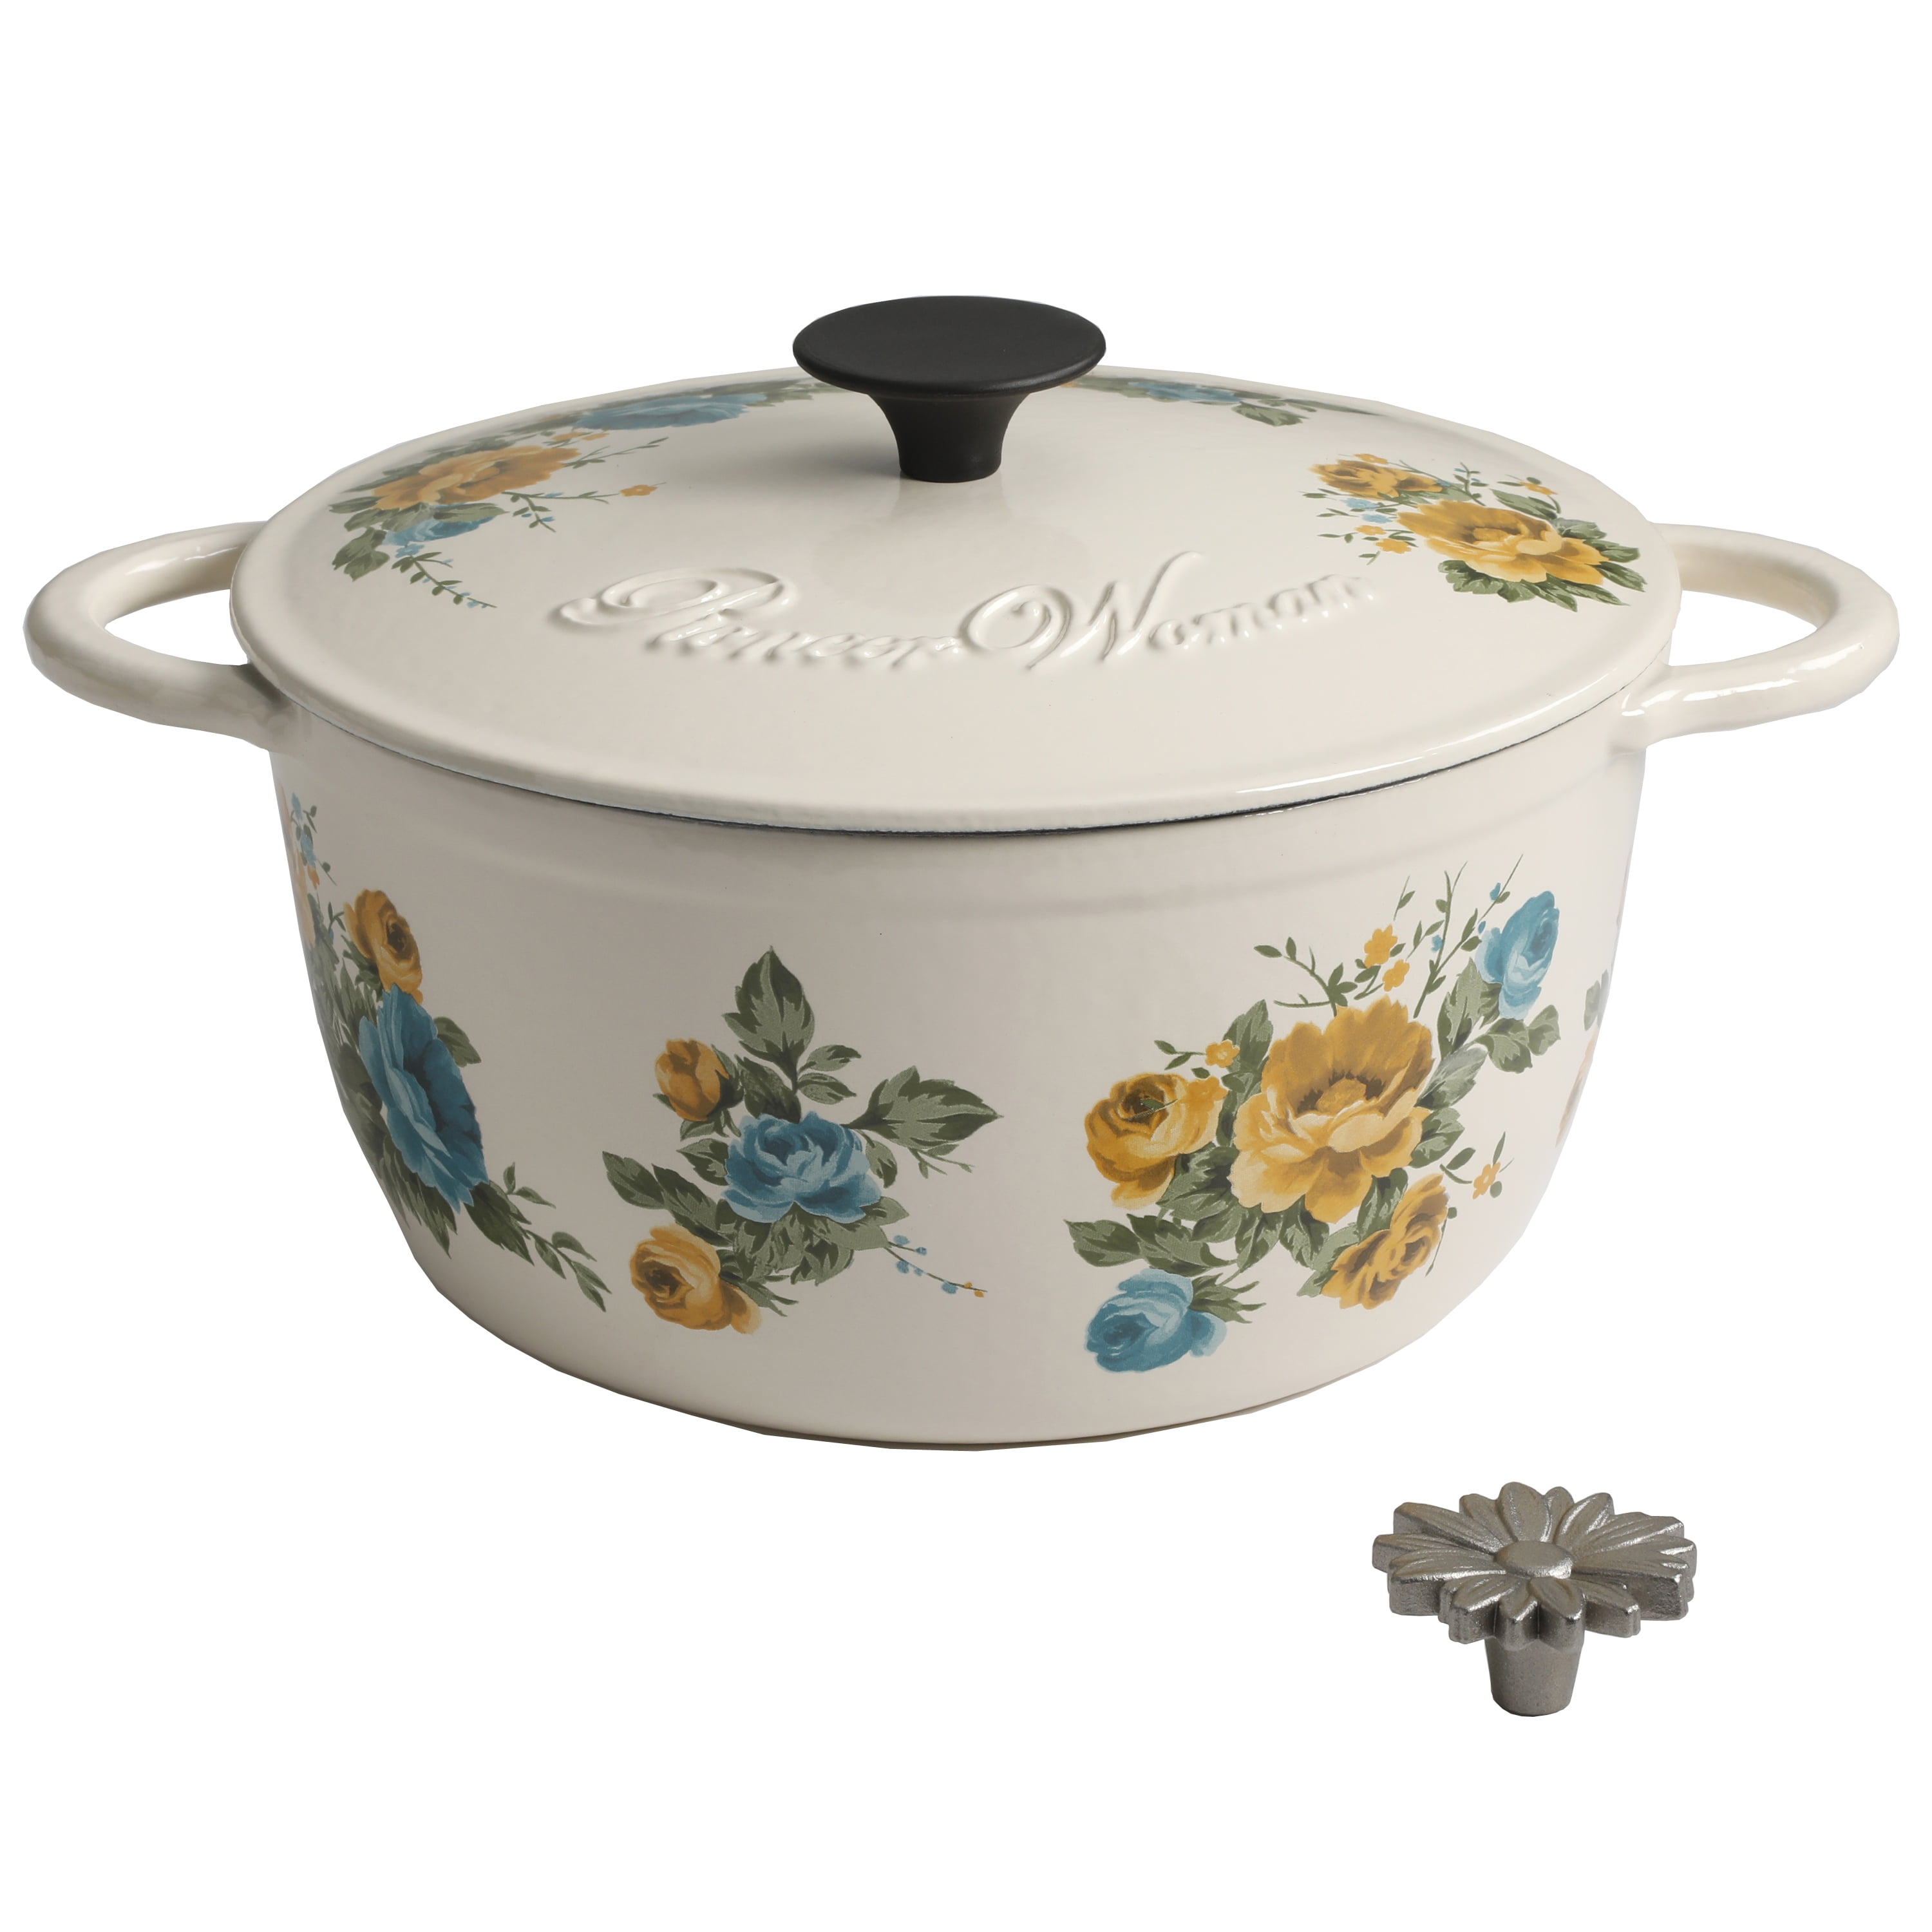 The Pioneer Woman Timeless Beauty Enamel on Cast Iron 3-Quart Dutch Oven, Pink